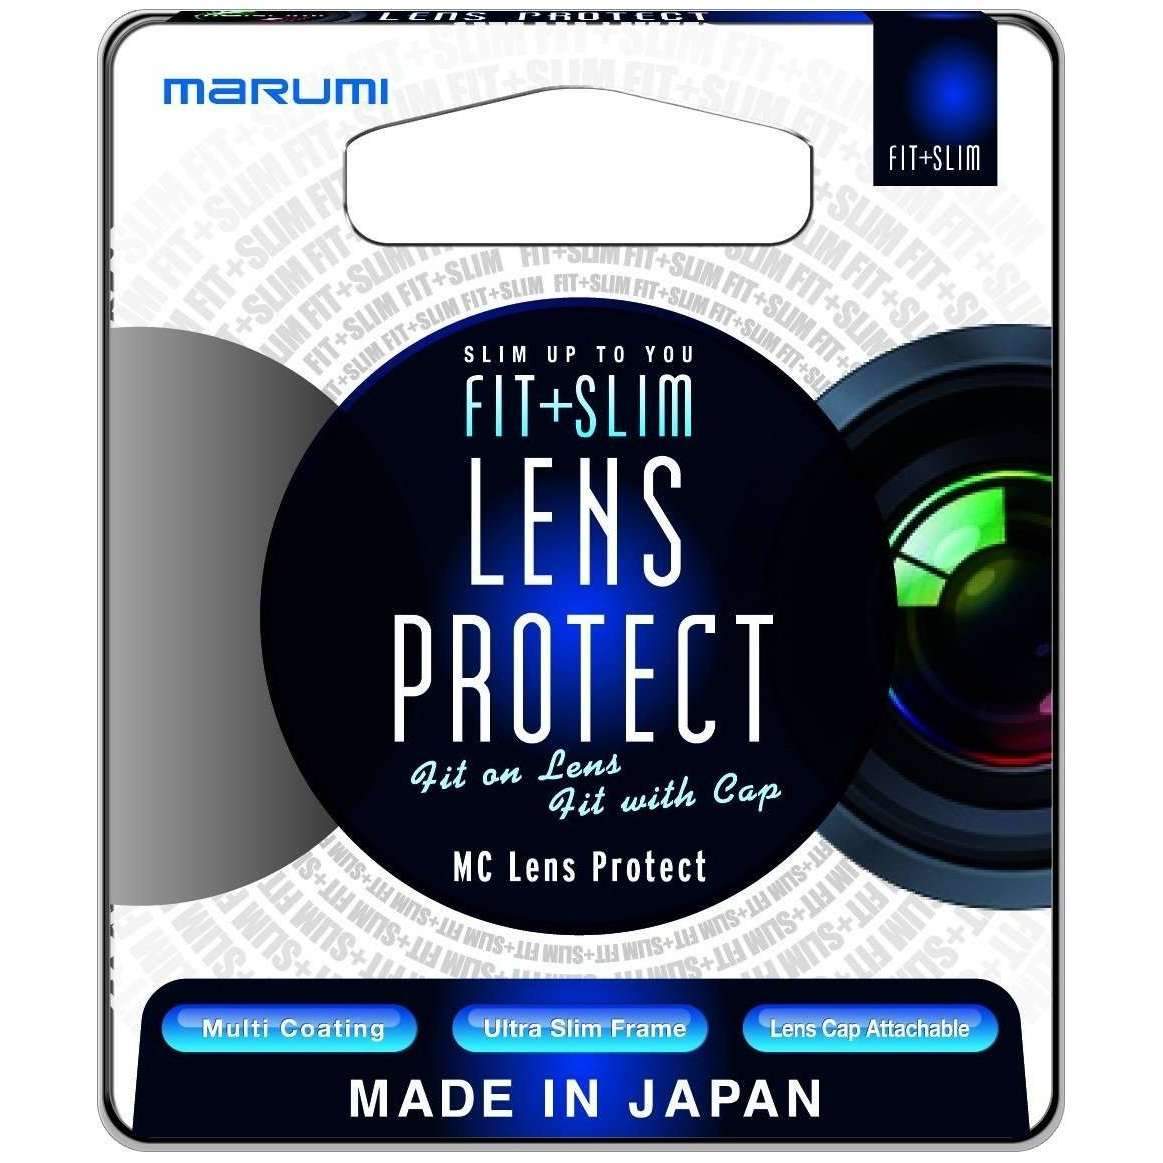 Marumi 58mm Fit + Slim Multi Coated Lens Protect Filter Marumi Filter - UV/Protection